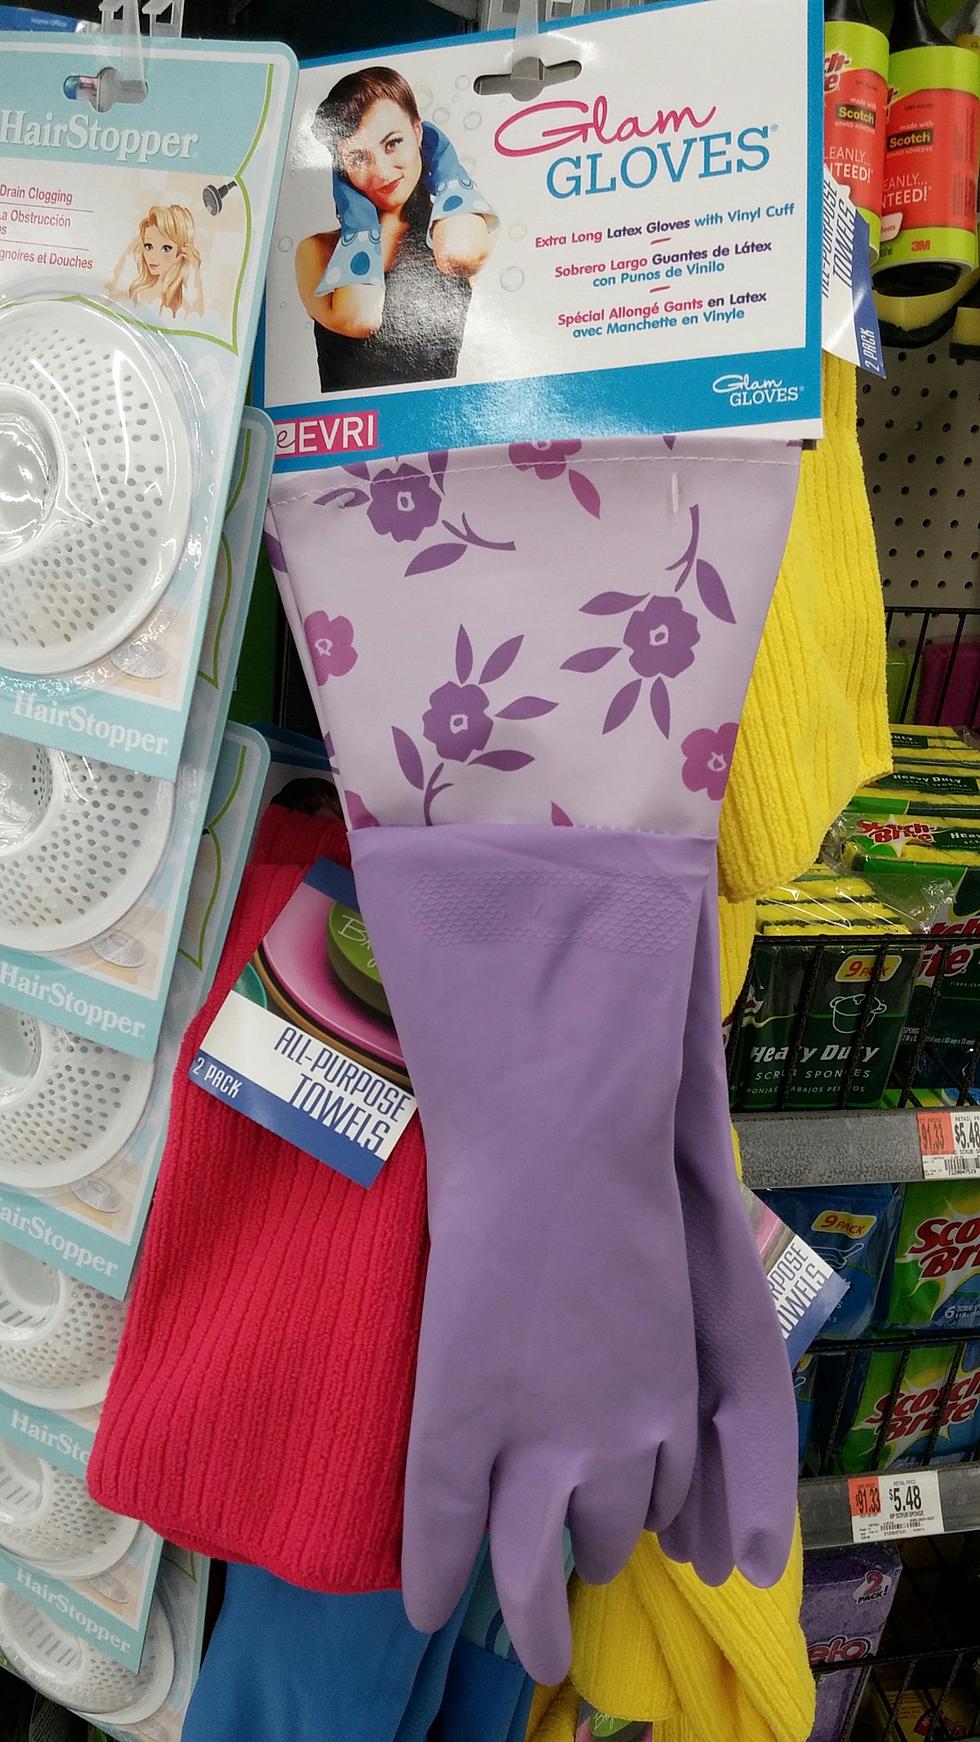 Sexy ‘Glam’ Housecleaning Gloves, Seriously?